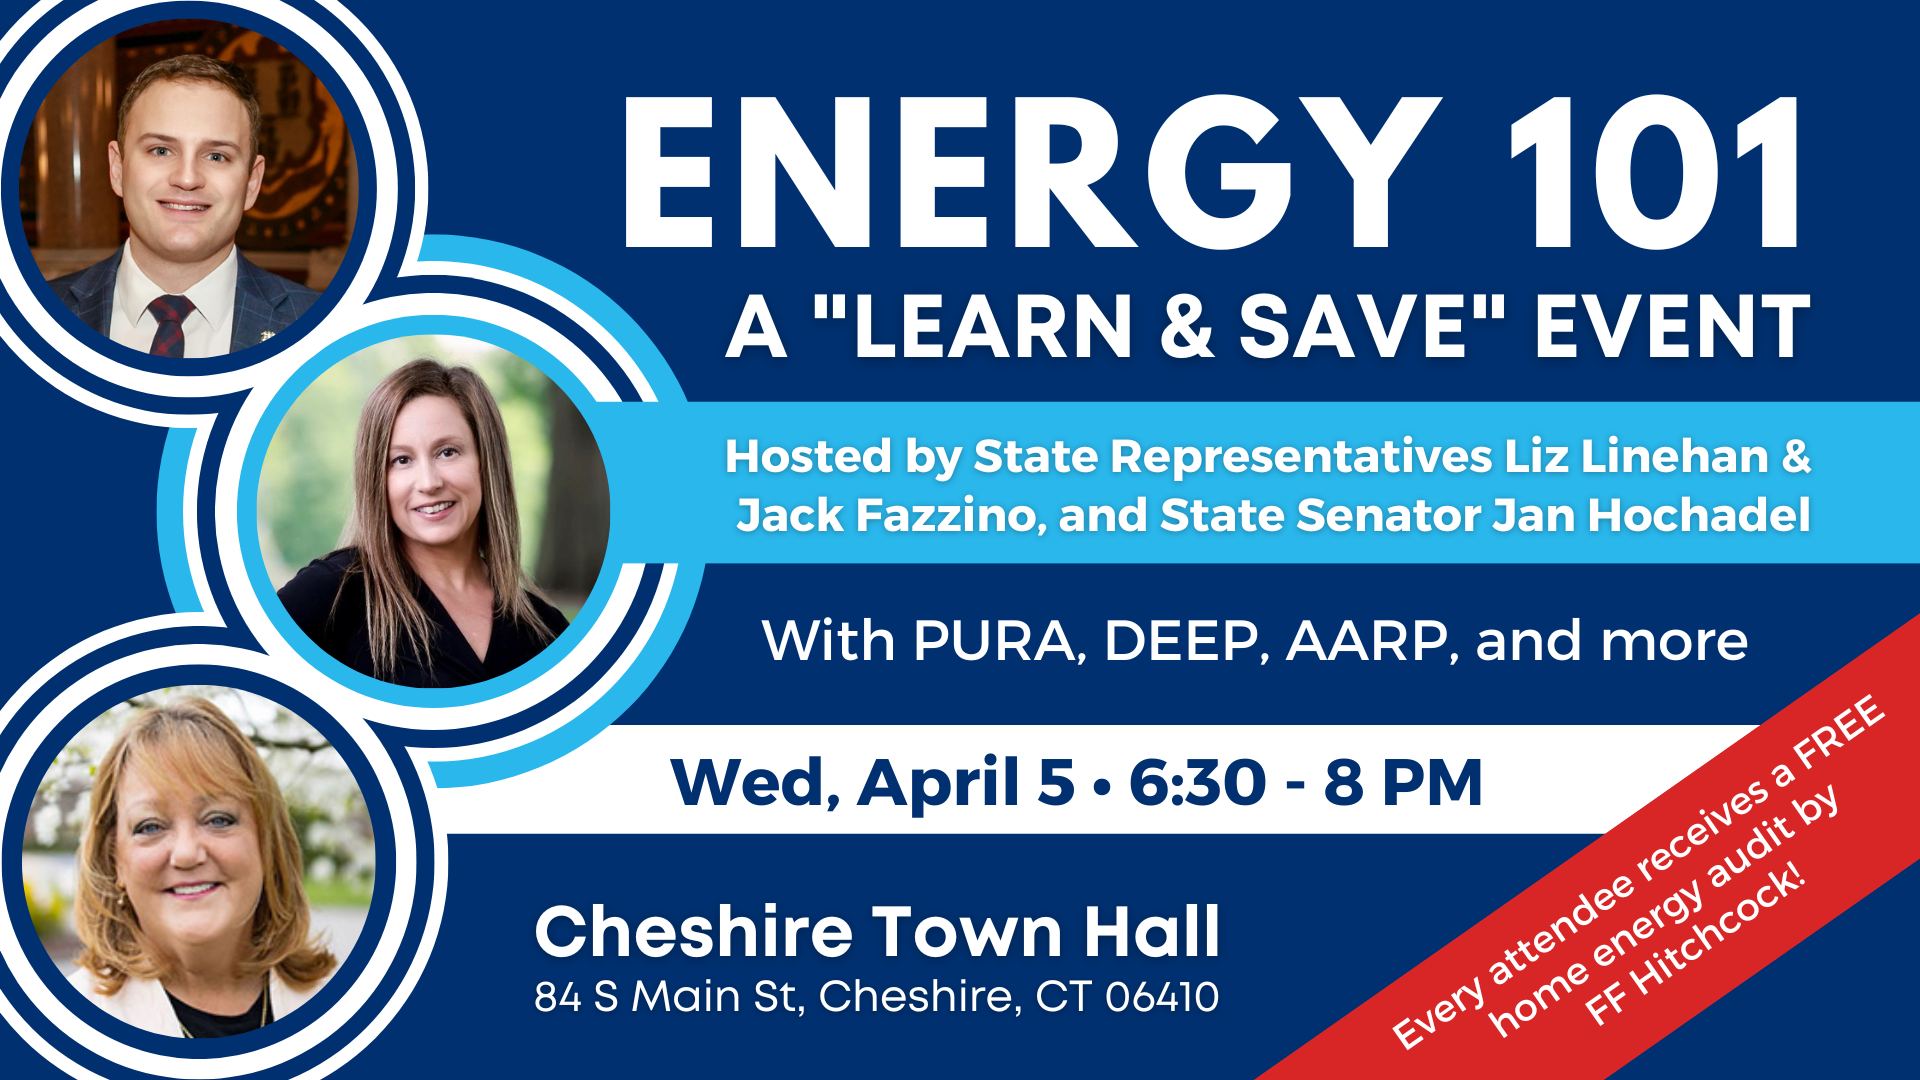 Please join us April 5 for Energy 101